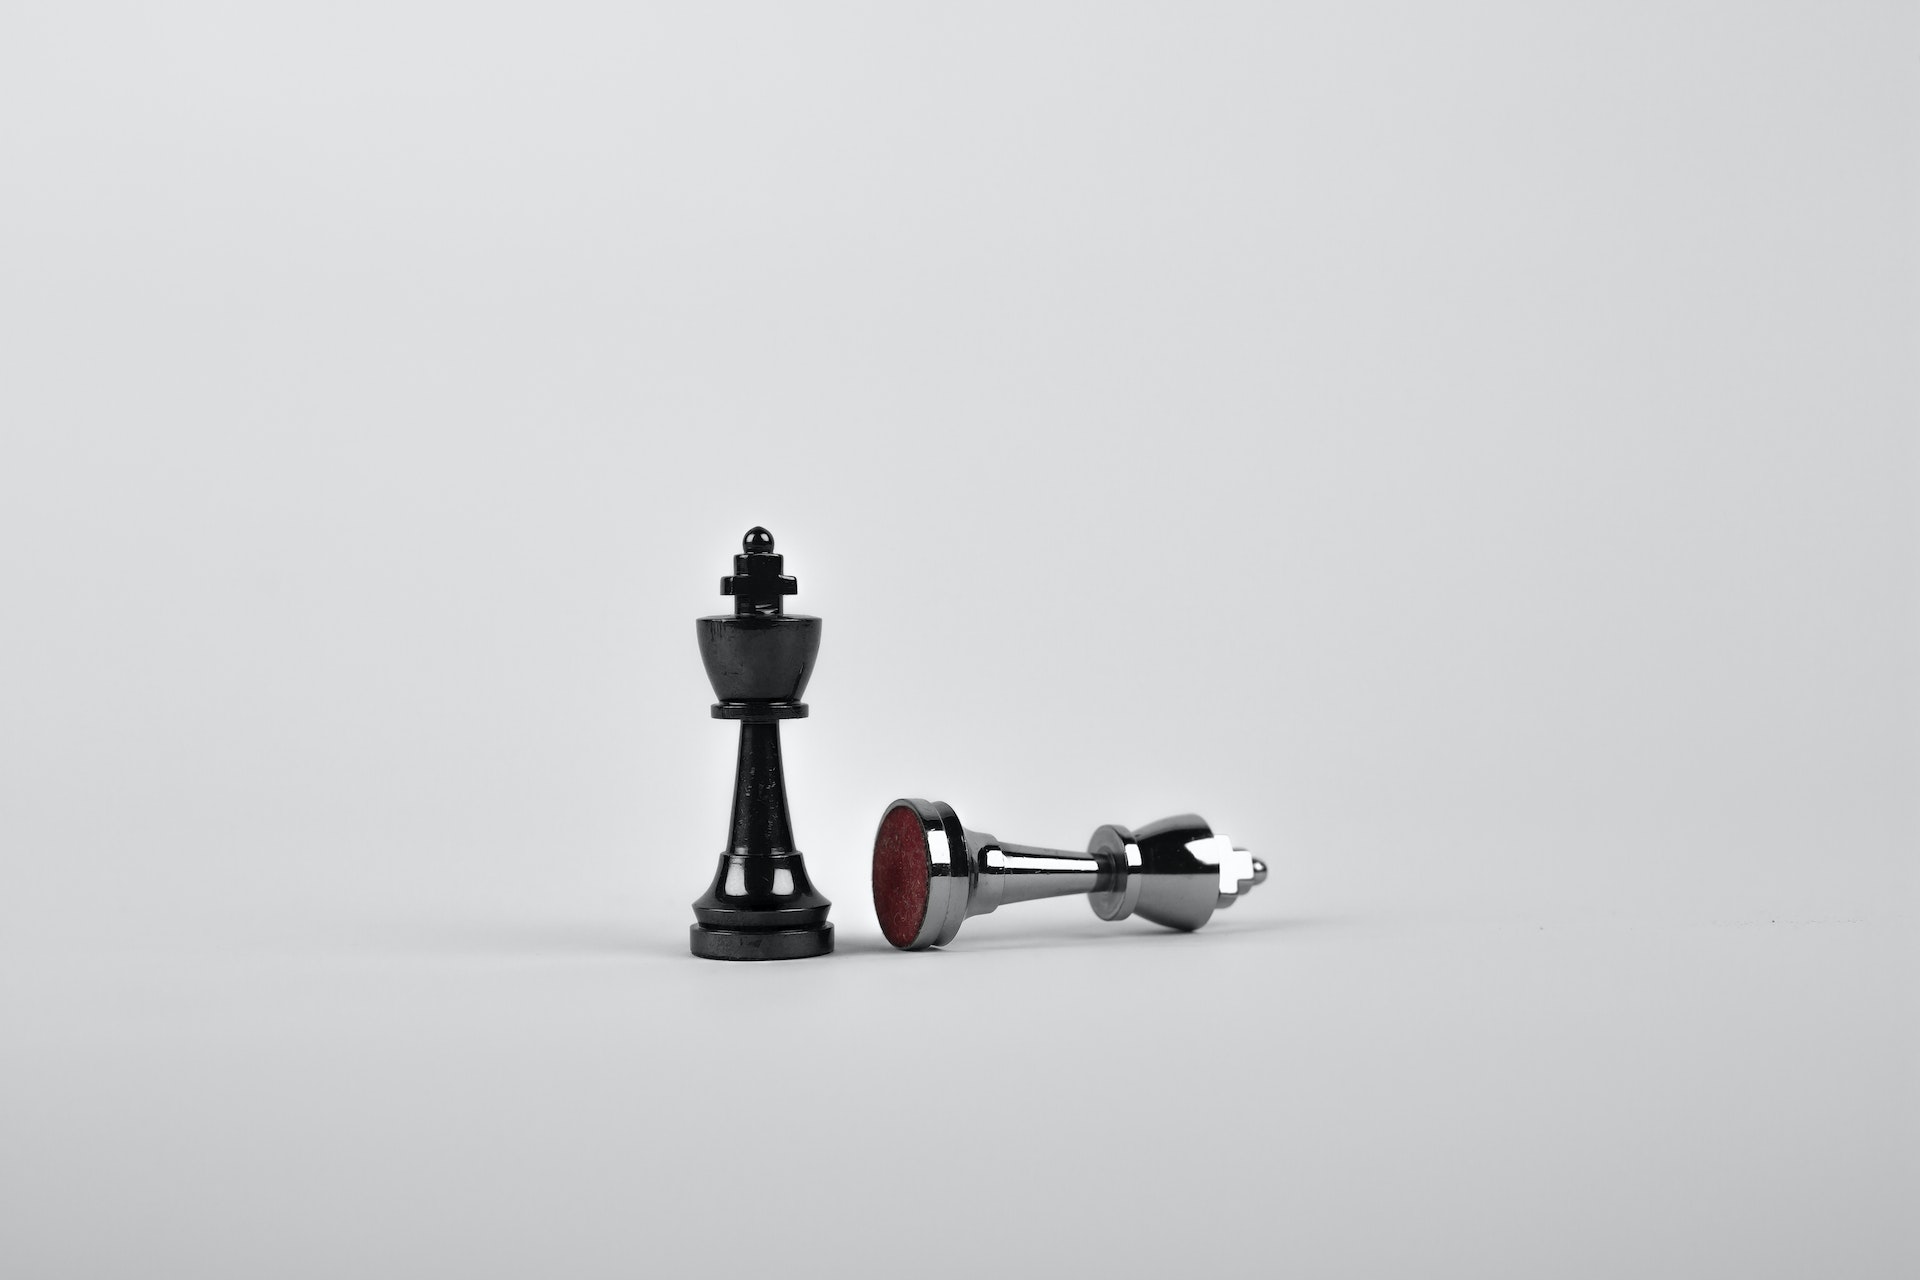 Battle - Two Silver Chess Pieces on White Surface